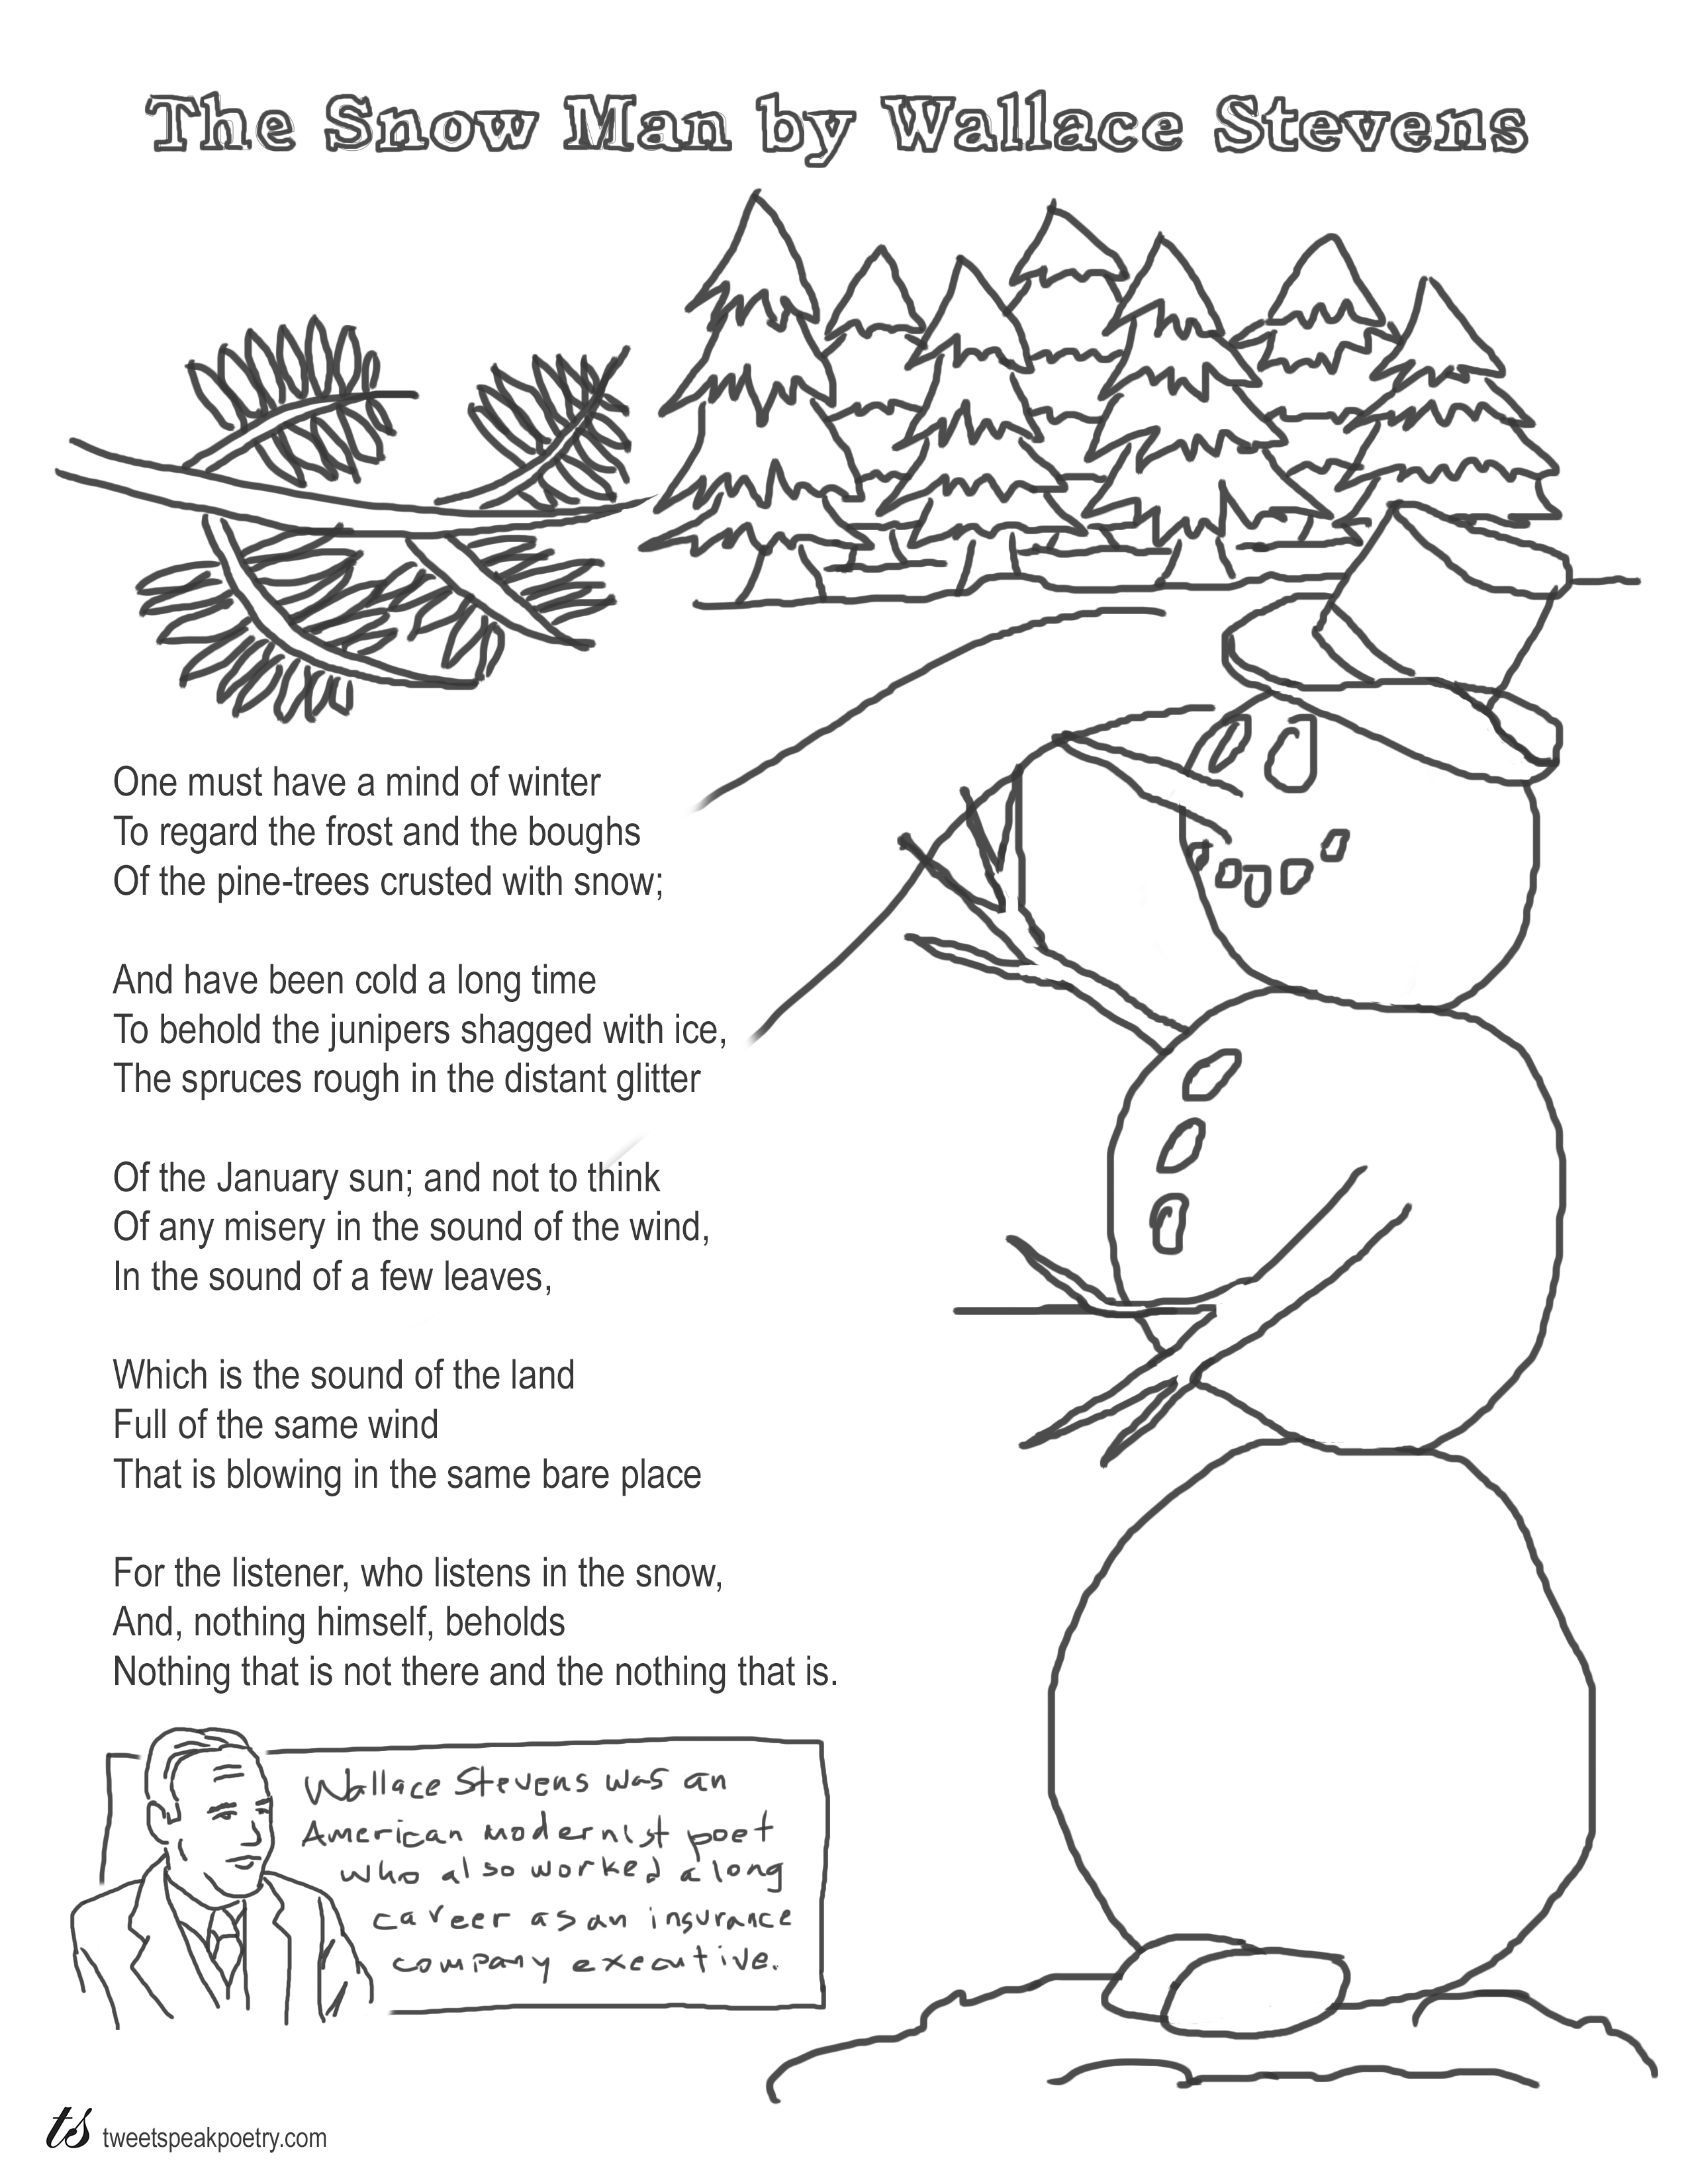 https://www.tweetspeakpoetry.com/wp-content/uploads/2016/01/The-Snow-Man-by-Wallace-Stevens-Coloring-Page-Poem.pdf